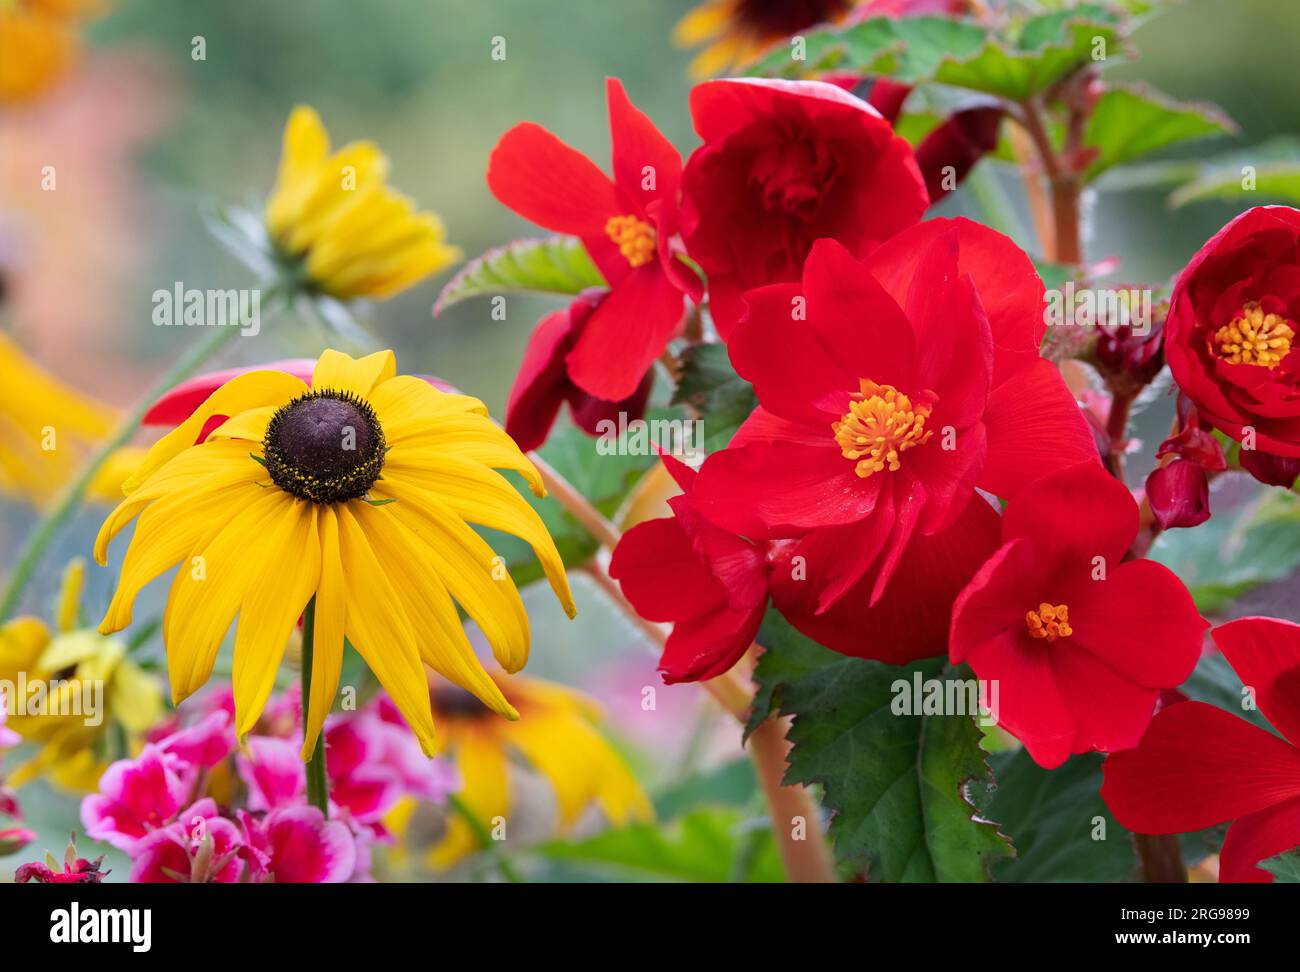 Red Begonia and rudbeckia flowers in August. UK Stock Photo